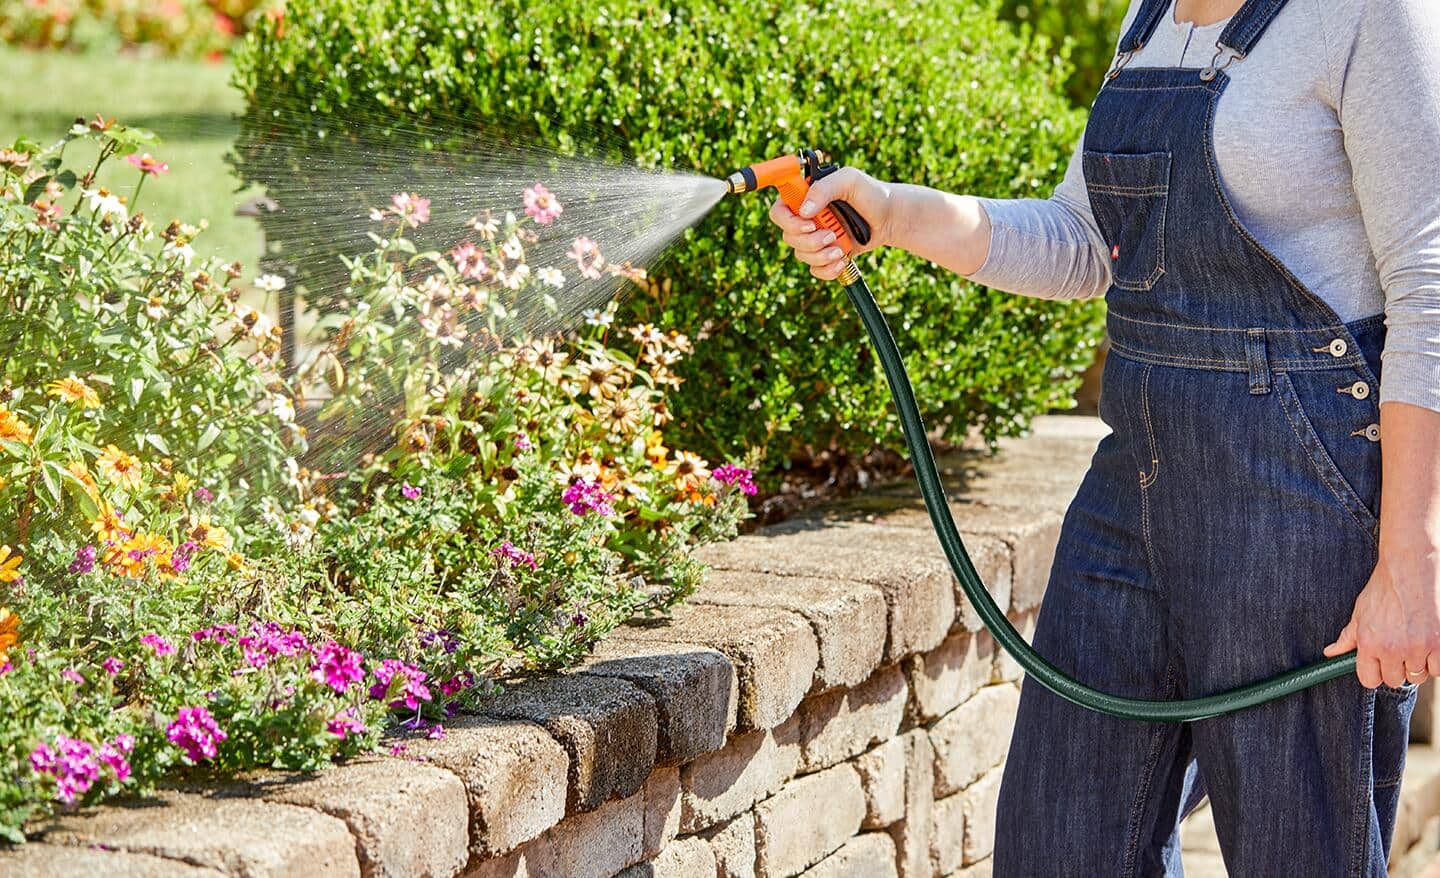 Gardener using a hose nozzle to spray a flower bed